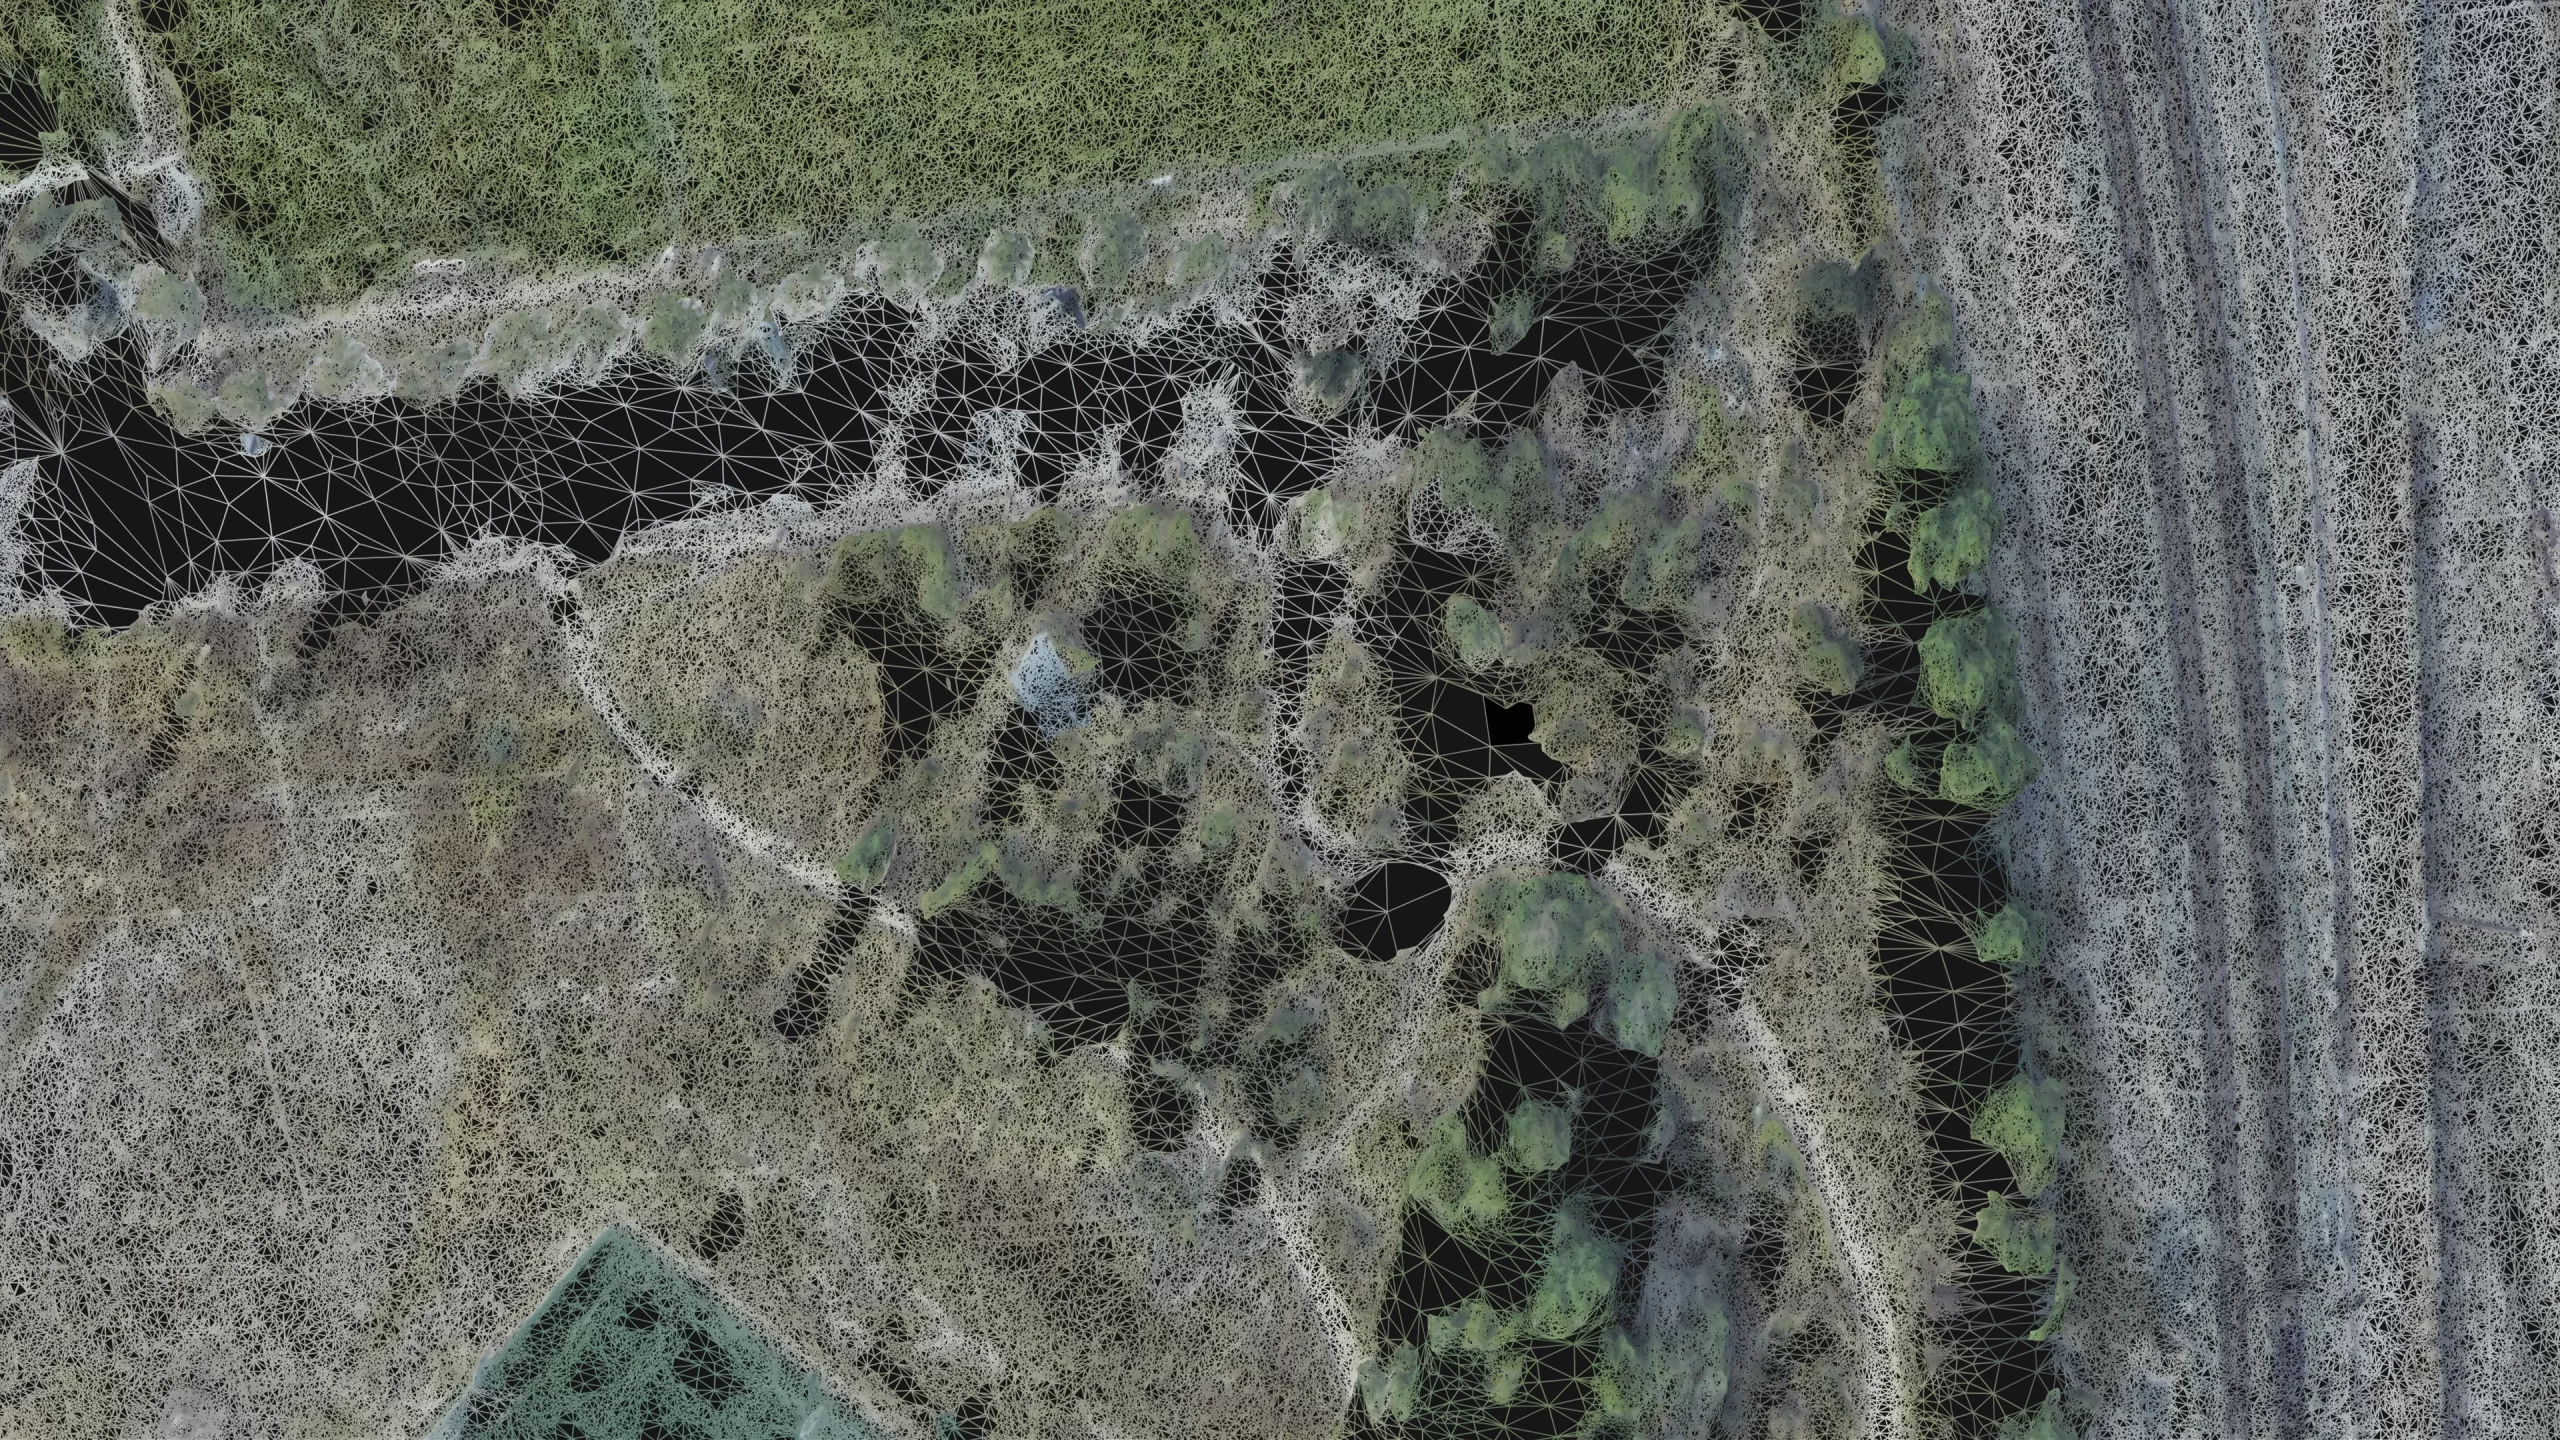 Photogrammetry of the Los Angeles River. LA River